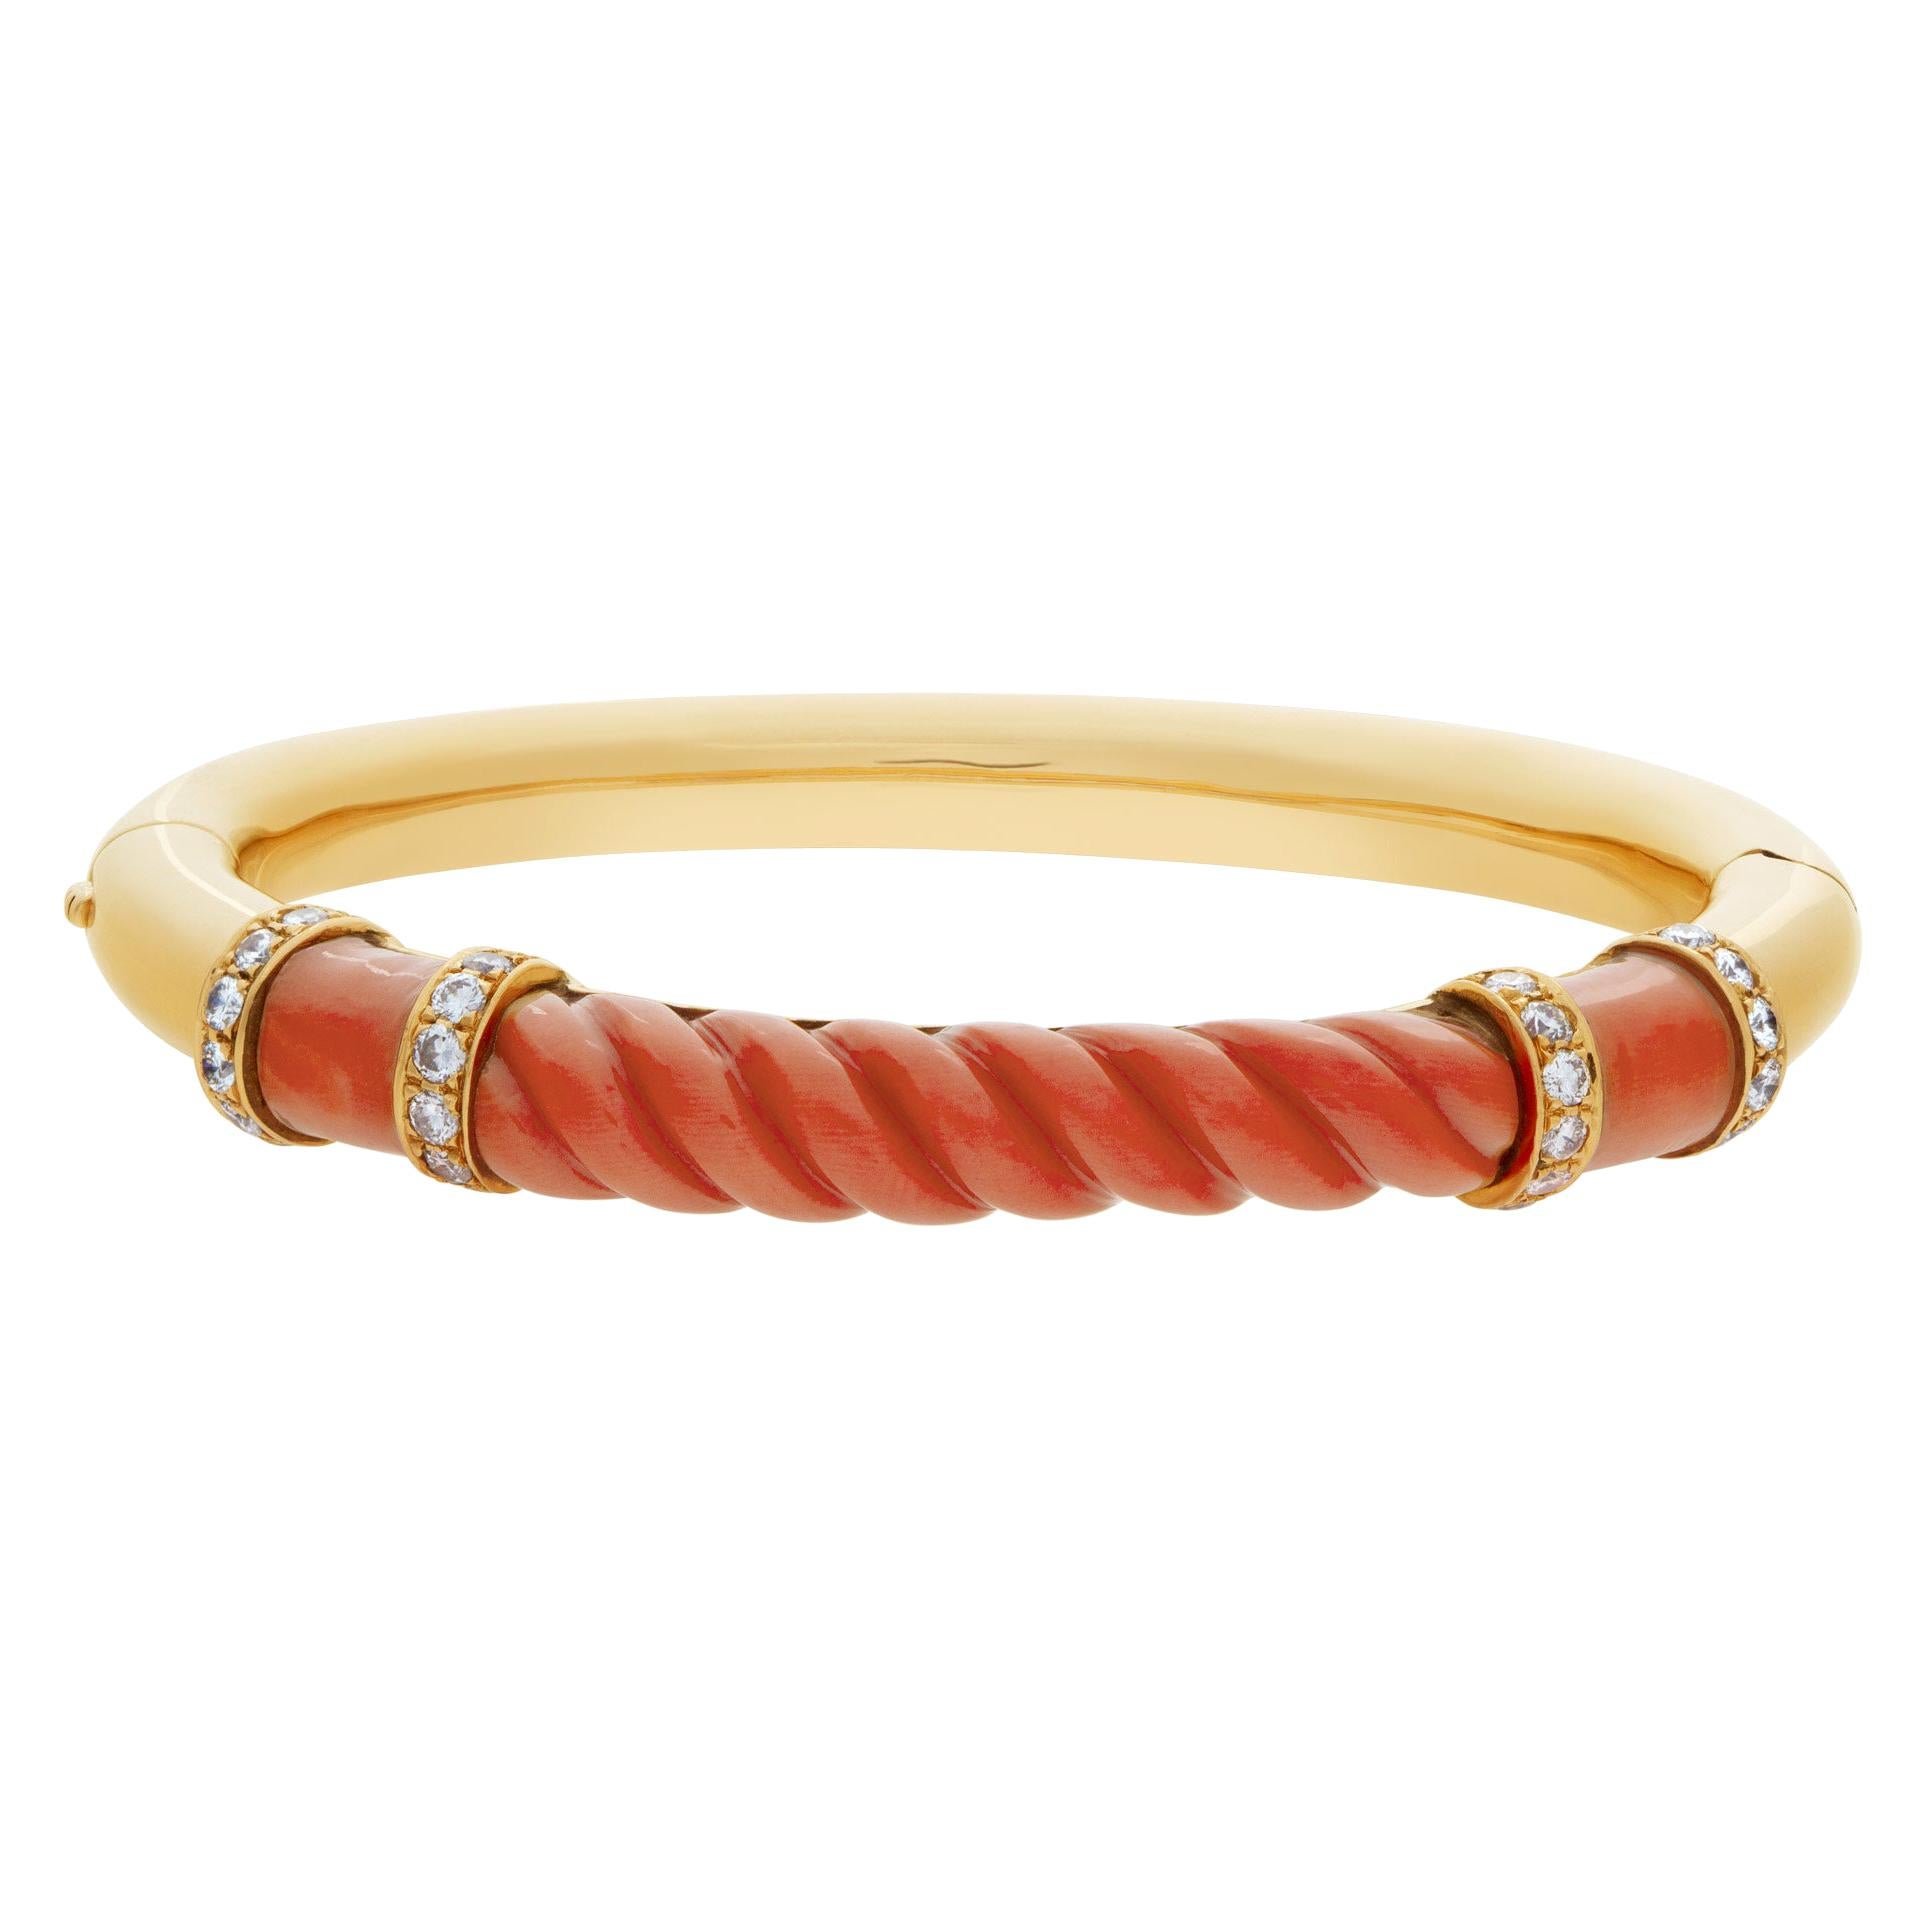 Bangle with Coral and Diamond Accents